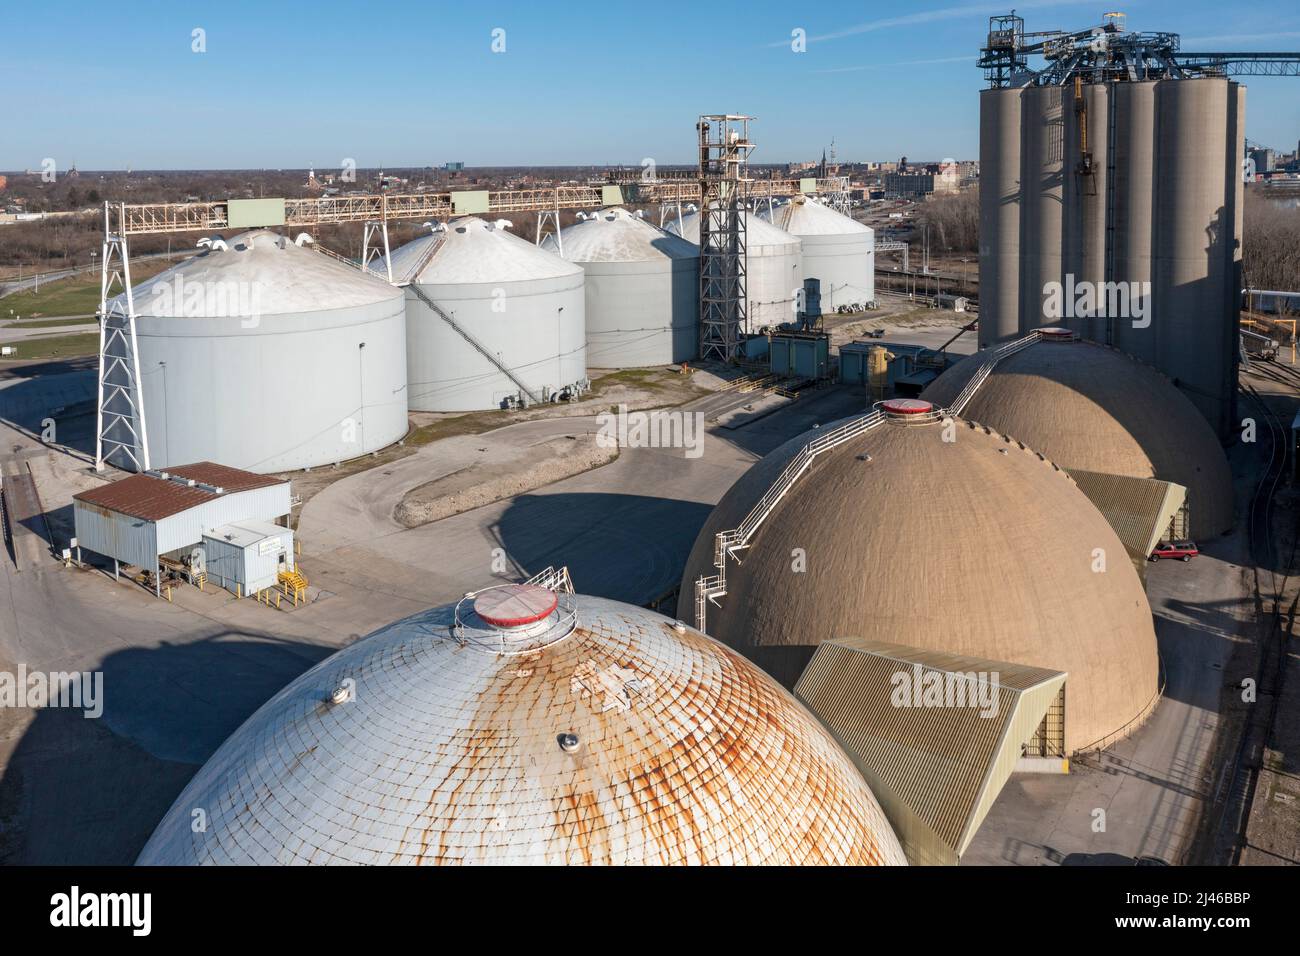 Toledo, Ohio - Fertilizer storage domes and a grain terminal on the Maumee River operated by The Andersons, a major agribusiness corporation. Stock Photo